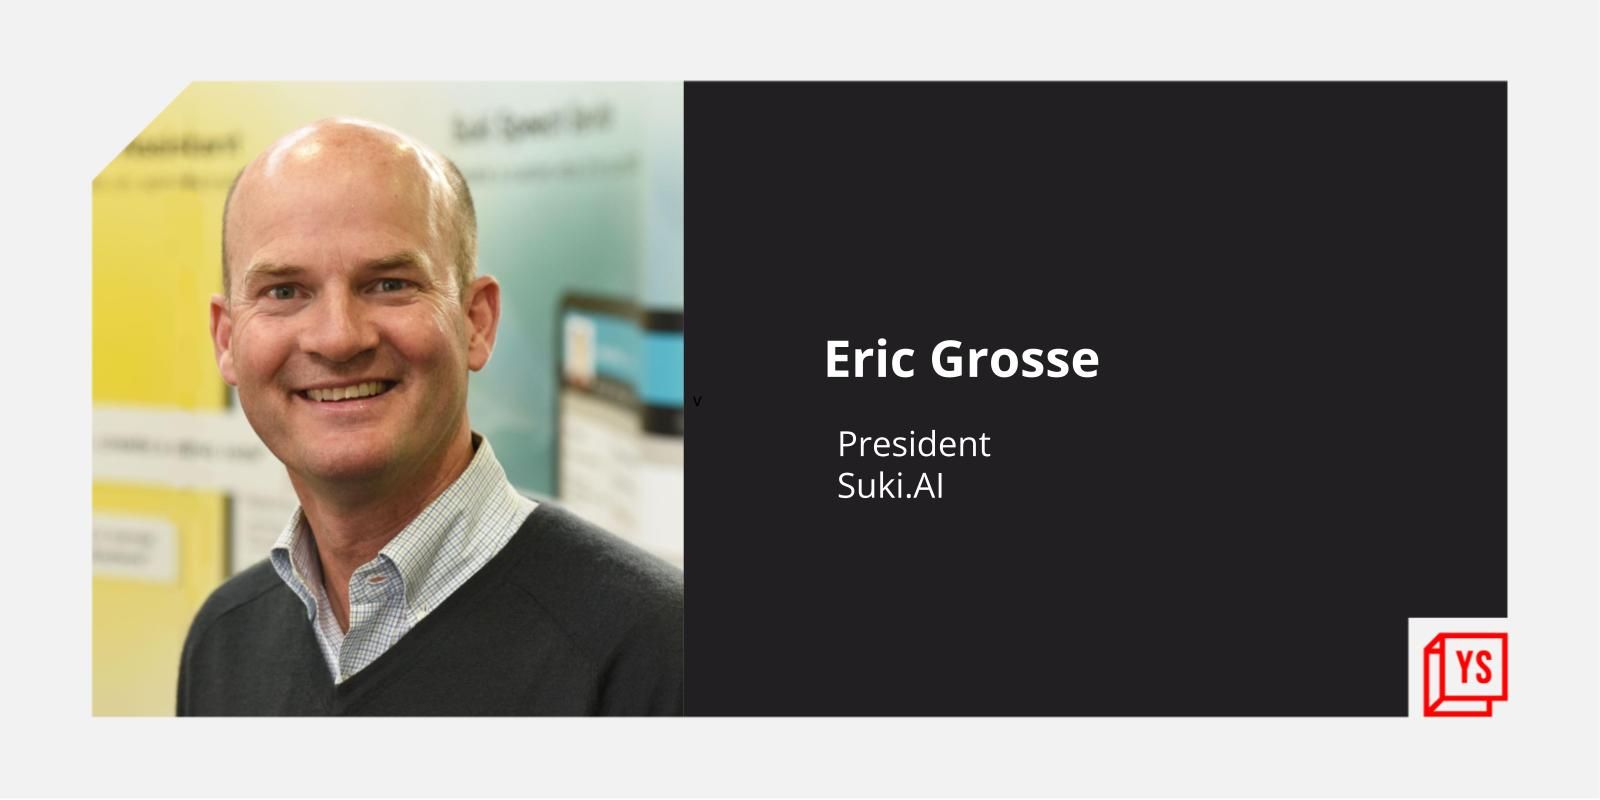 We’re passionate about making technologies simpler and being a true partner to doctors, says Suki.AI’s Eric Grosse